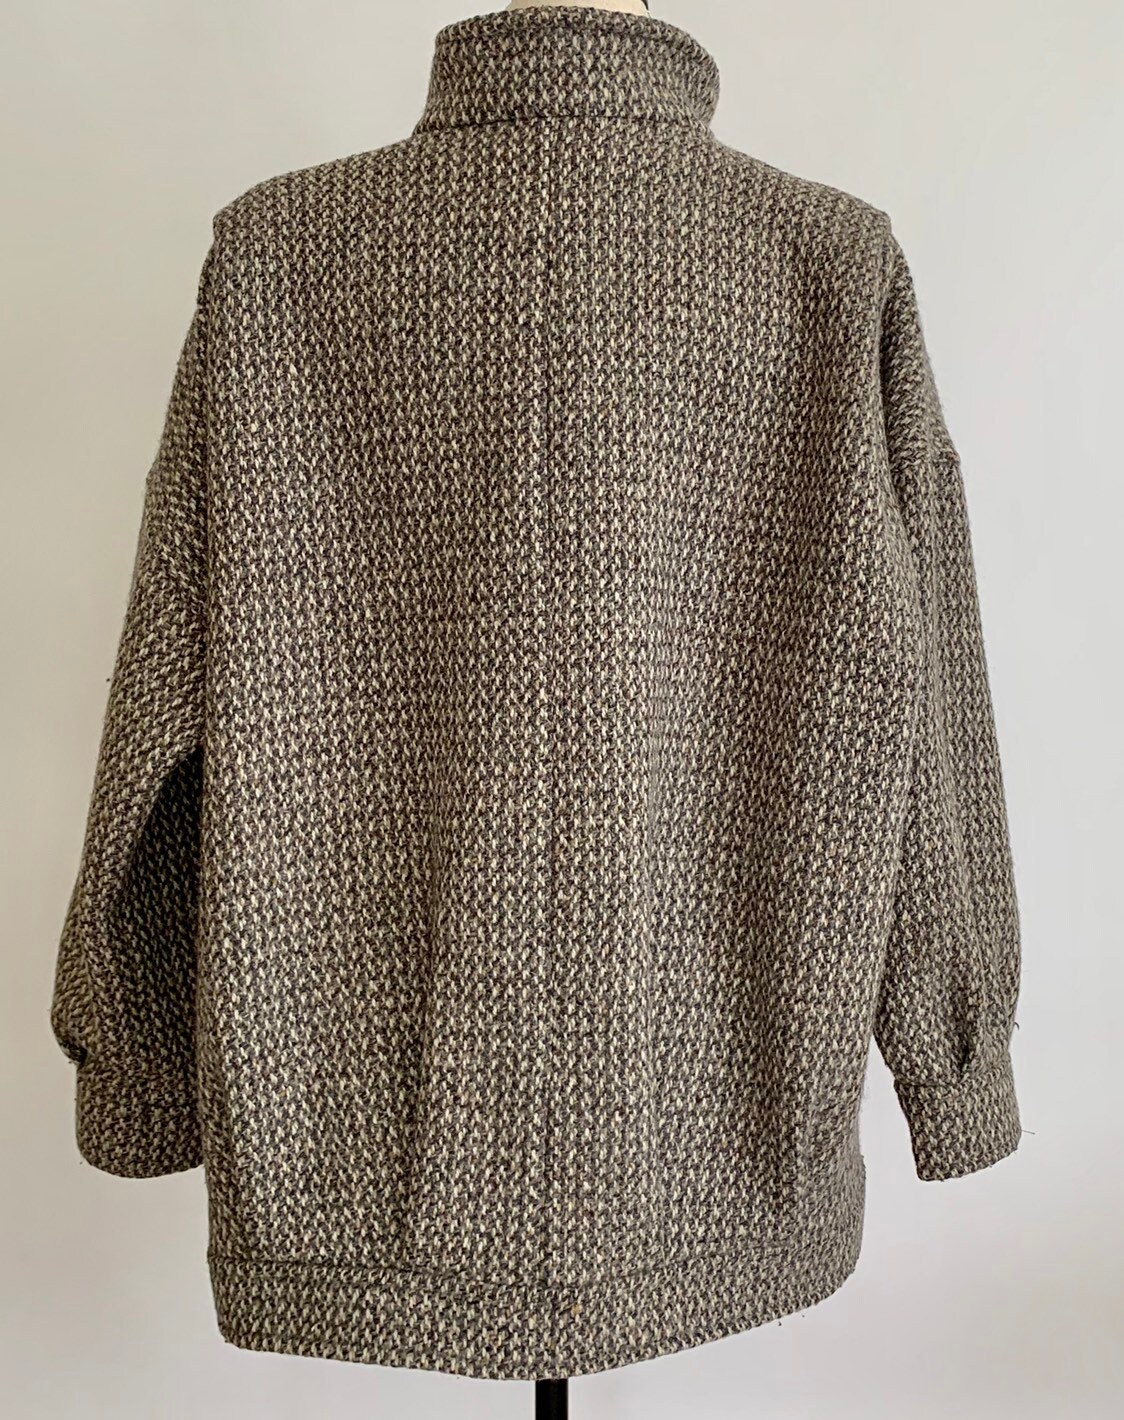 Gray Tweed Wool Coat Vintage 70s 80s Forecaster of Boston High Funnel ...